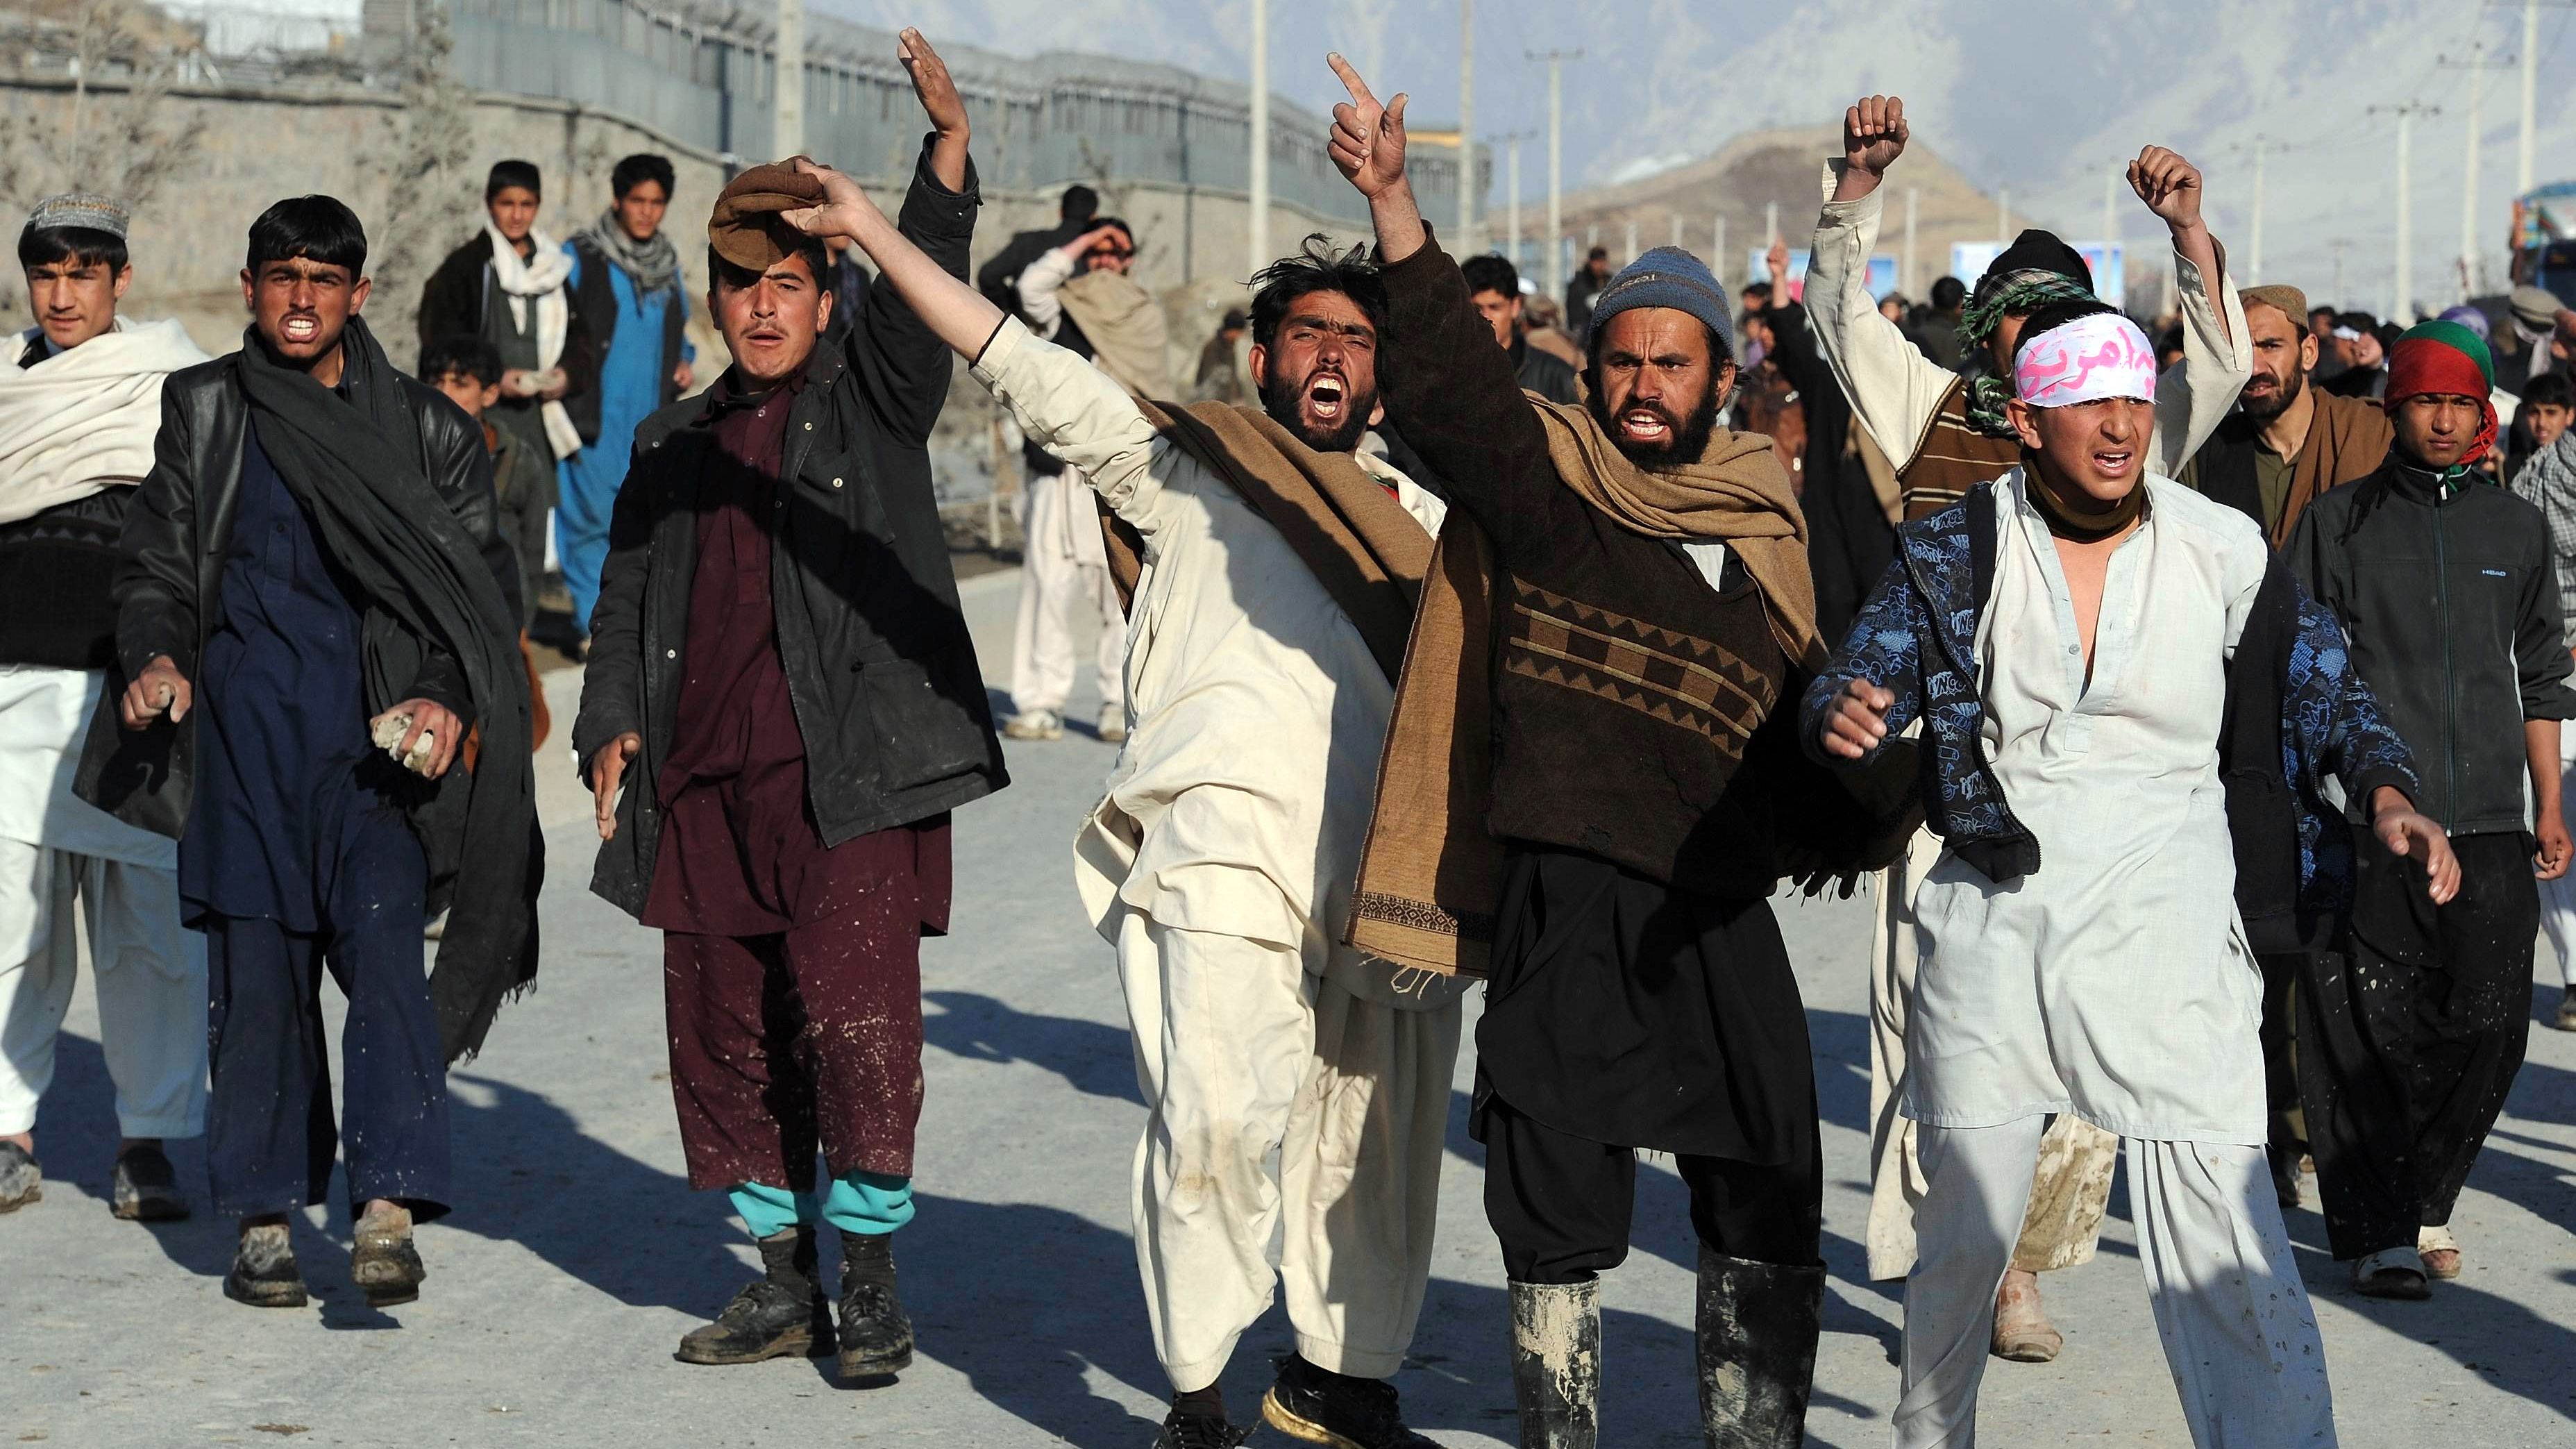 Afghan demonstrators shout anti-U.S. slogans during a recent protest in Kabul against the desecration of Qurans.